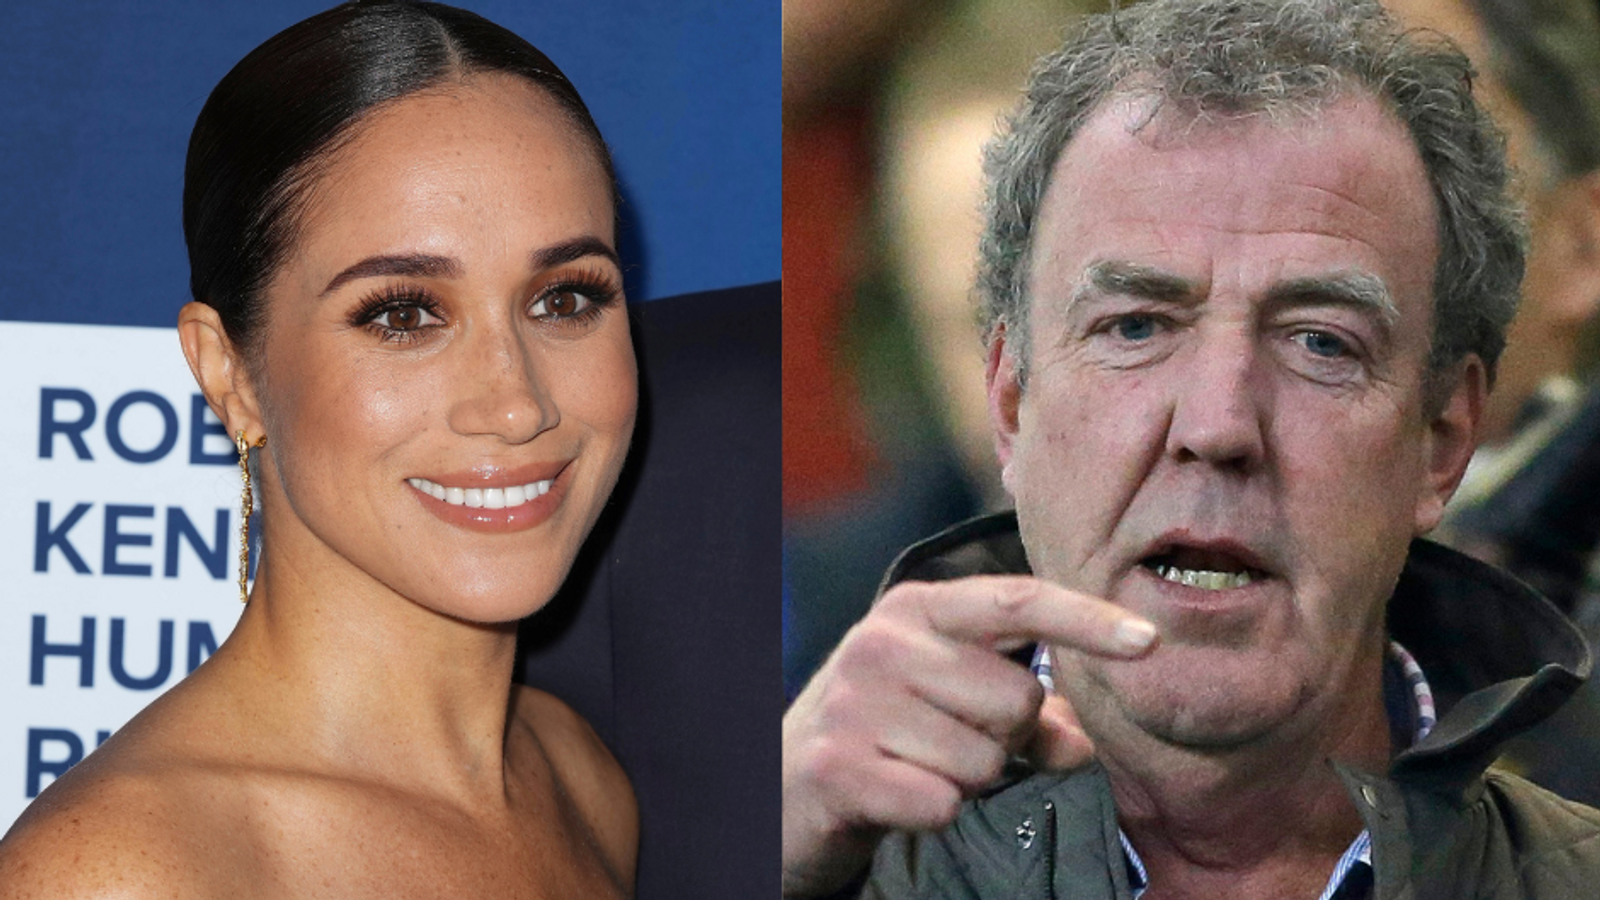 Harry and Meghan reject The Sun's Clarkson apology - calling it 'nothing more than a PR stunt'